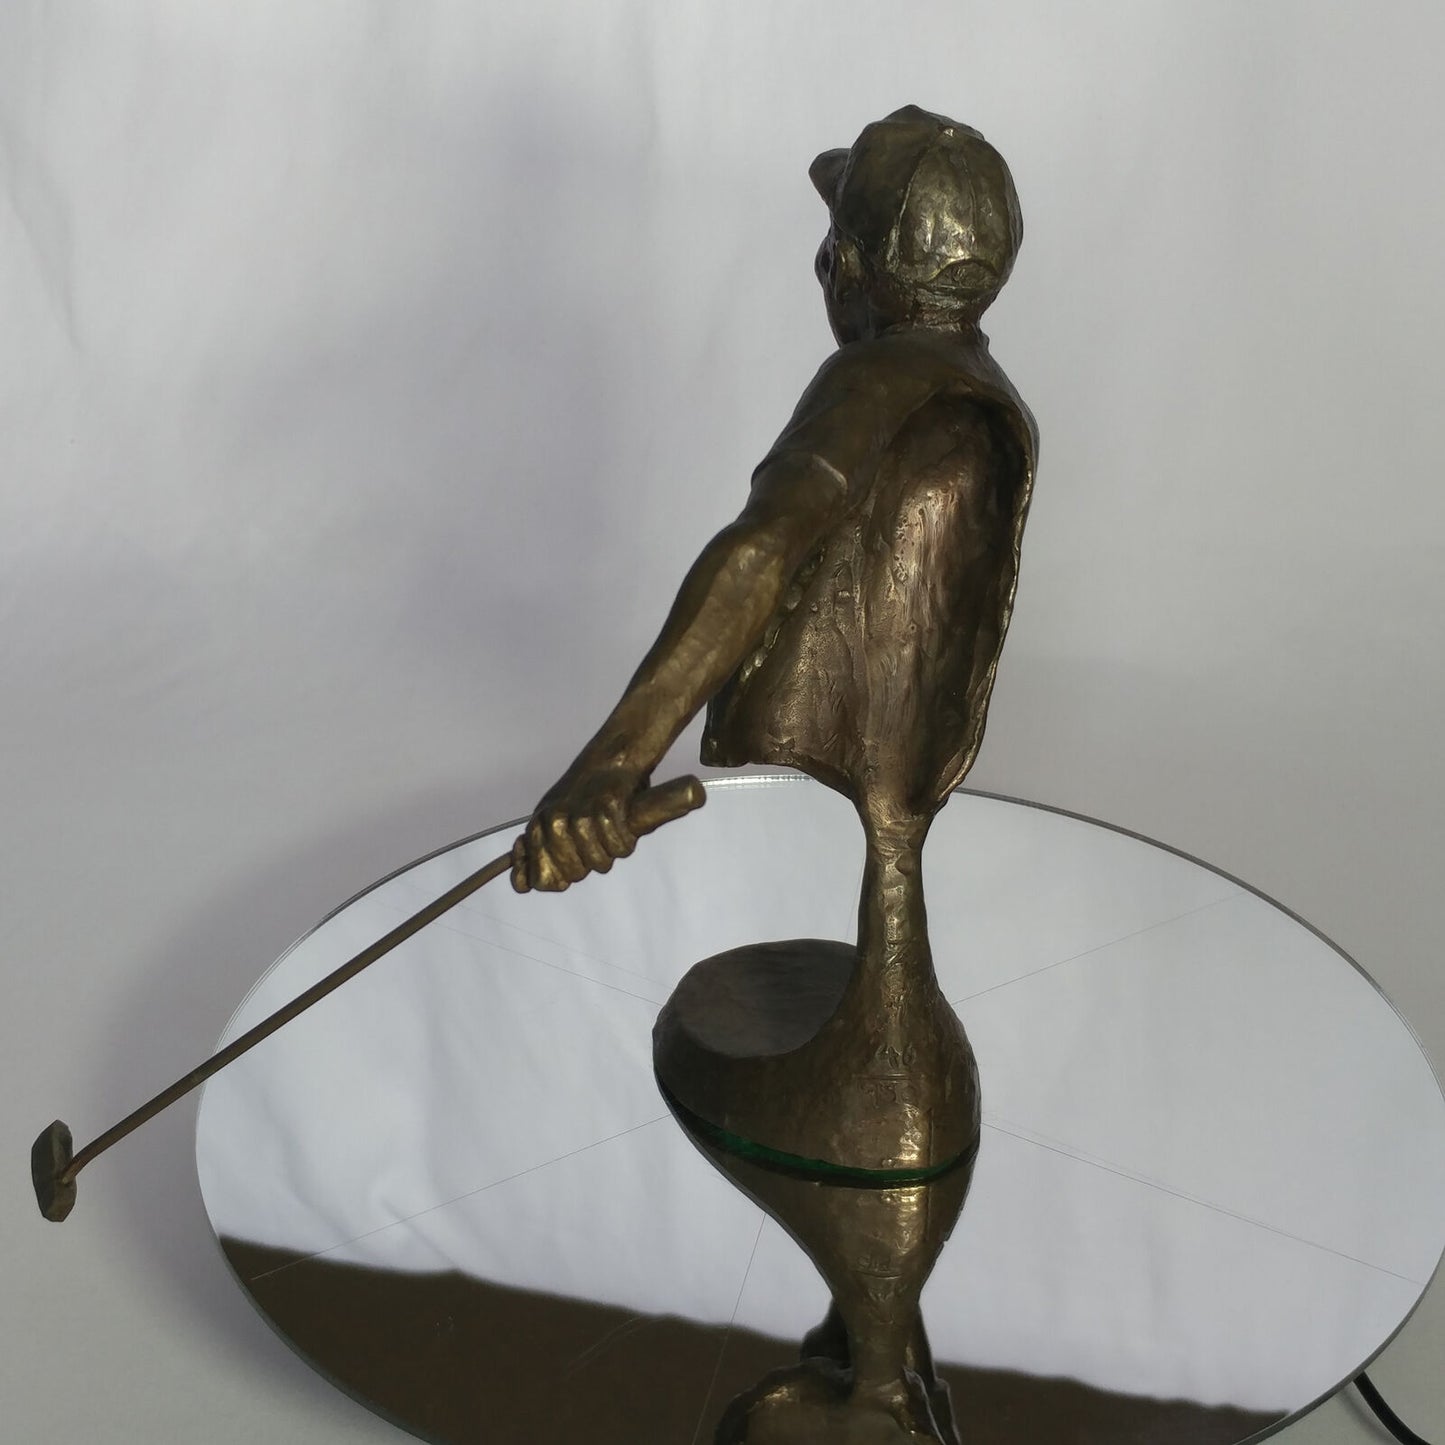 Mark Hopkins Limited Edition Bronze Sculpture: "Yes!"